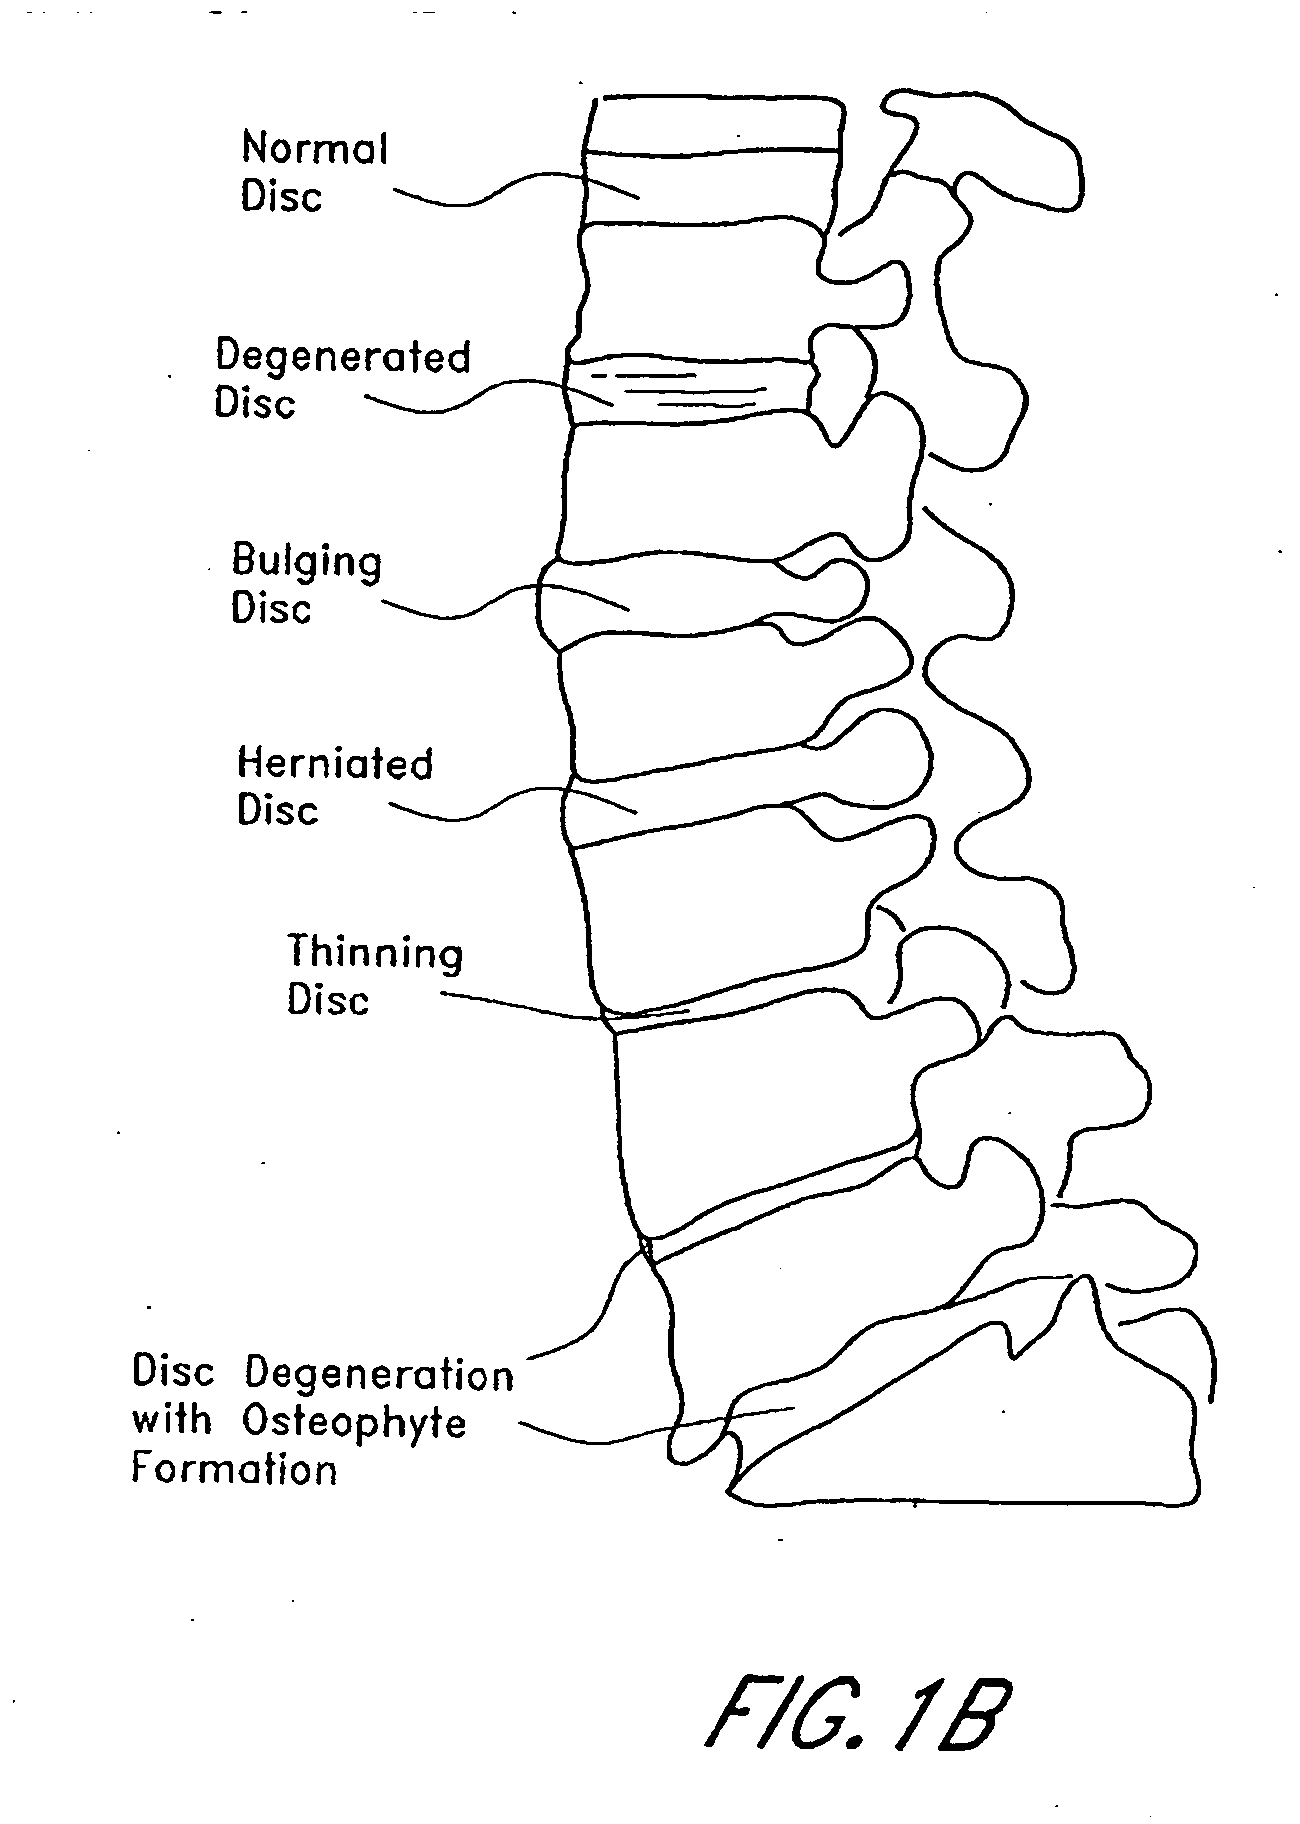 Exchange system for axial spinal procedures